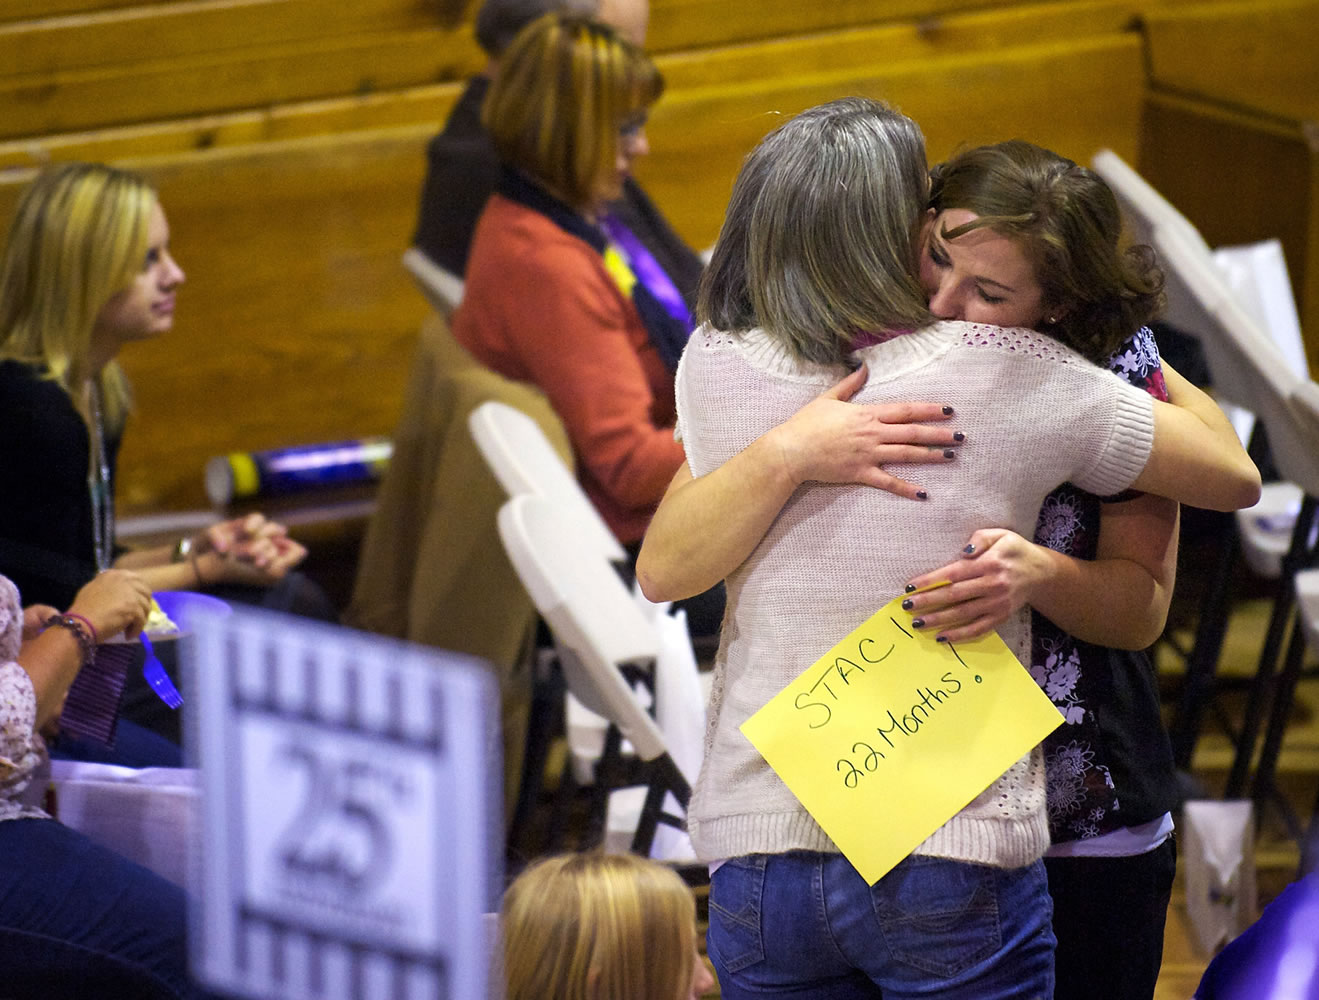 Staci Harrington, 32, right, of Vancouver, hugs her sister, Nikki Fountain, 39, during the Vancouver Relay for Life kickoff rally Thursday at St. John Lutheran Church. Harrington was diagnosed with non-Hodgkin lymphoma 22 months ago.